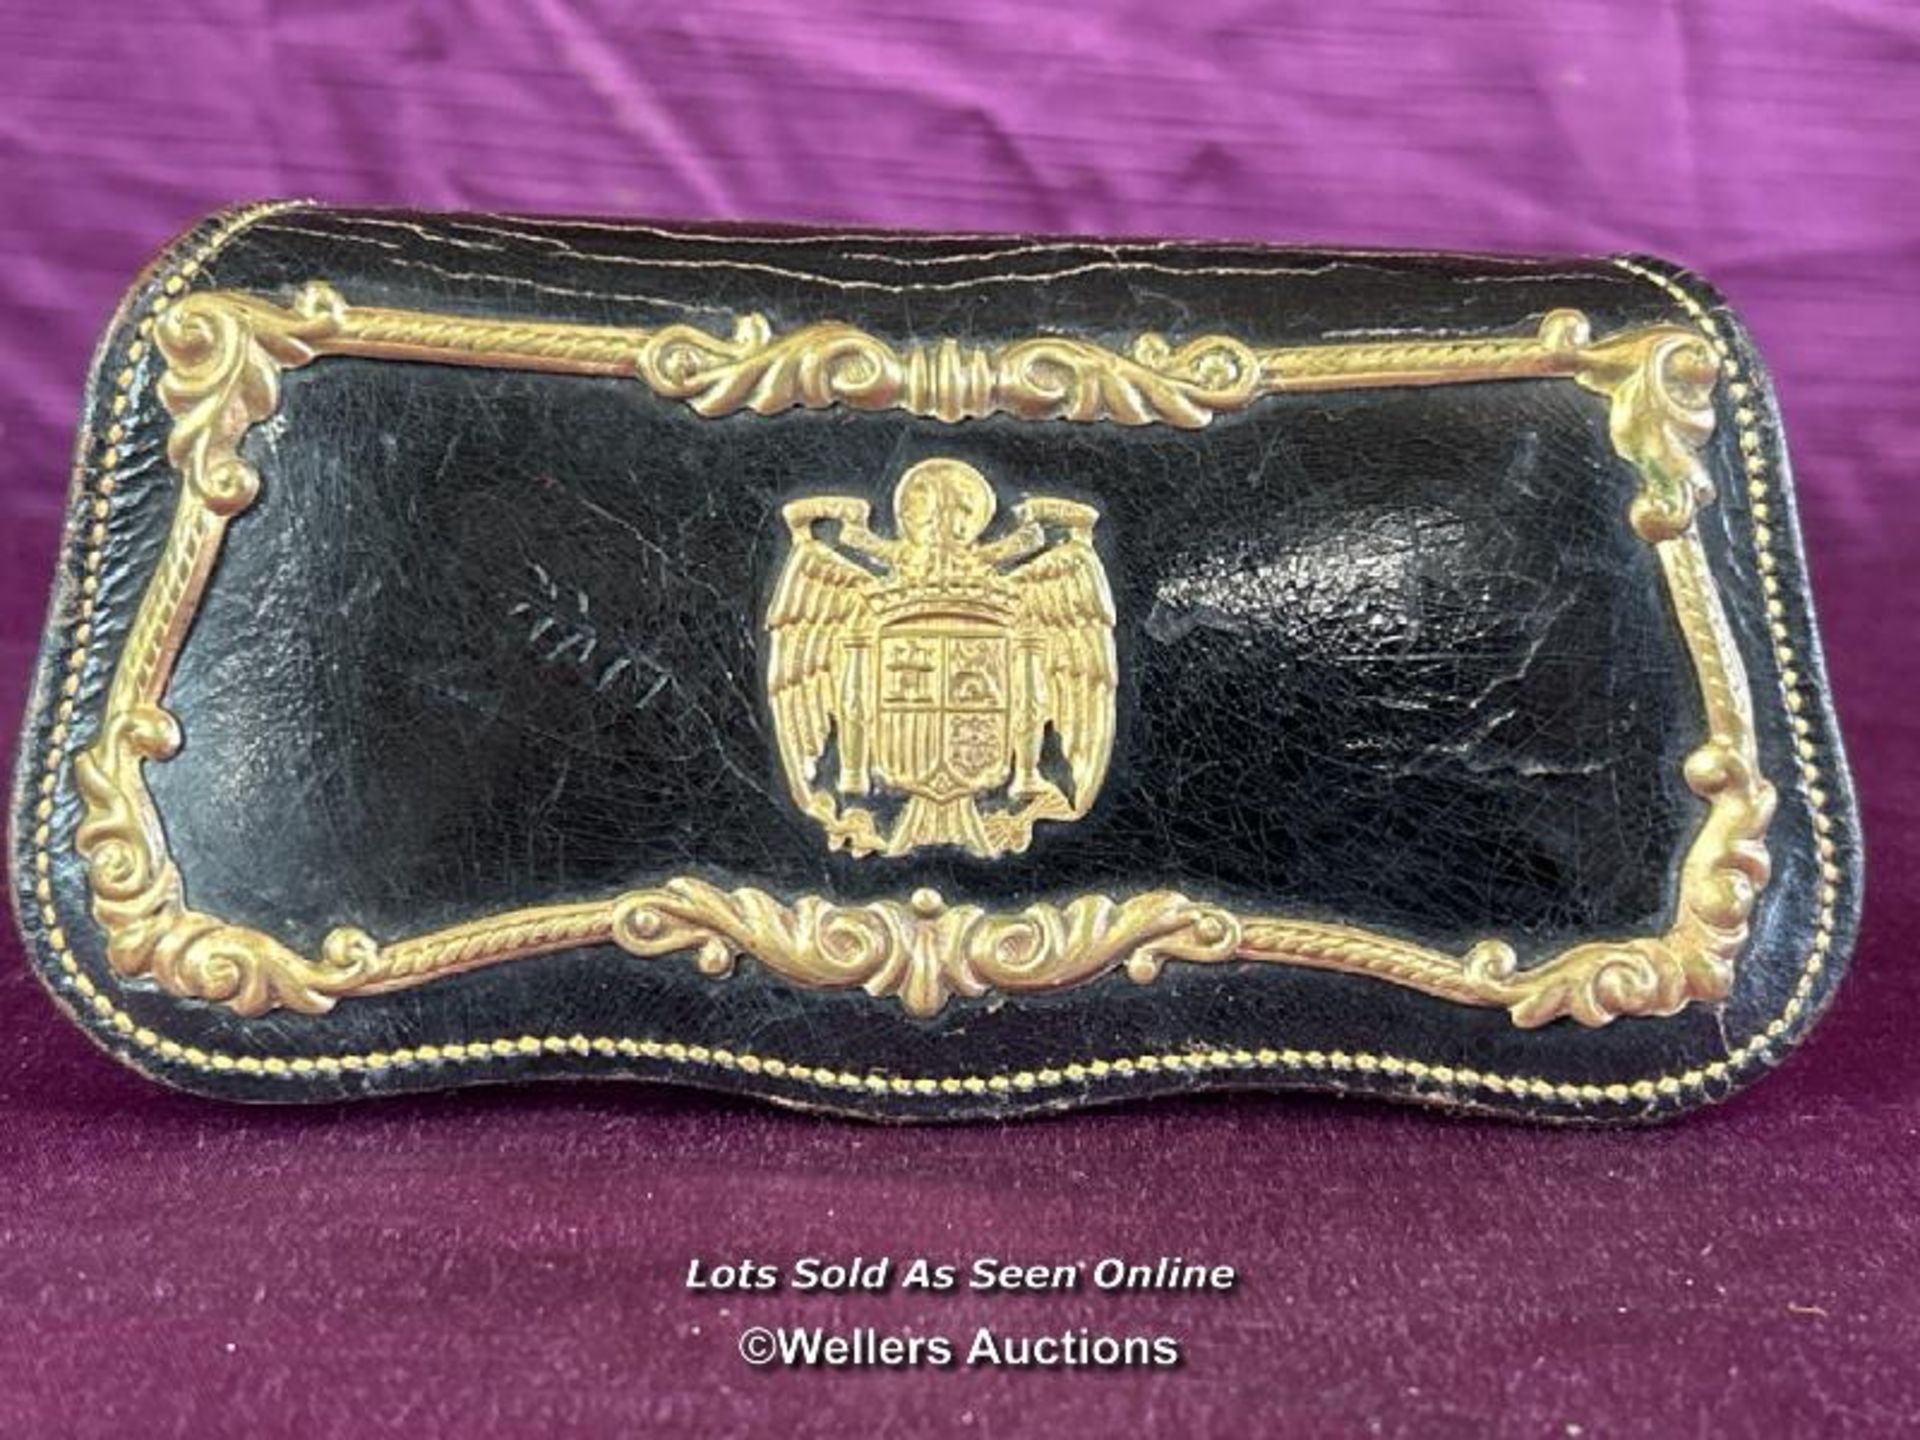 ORIGINAL LEATHER FASCIST SPANISH OFFICERS CROSS BELT POUCH. COAT OF ARMS DEPICTING THE DICTATOR